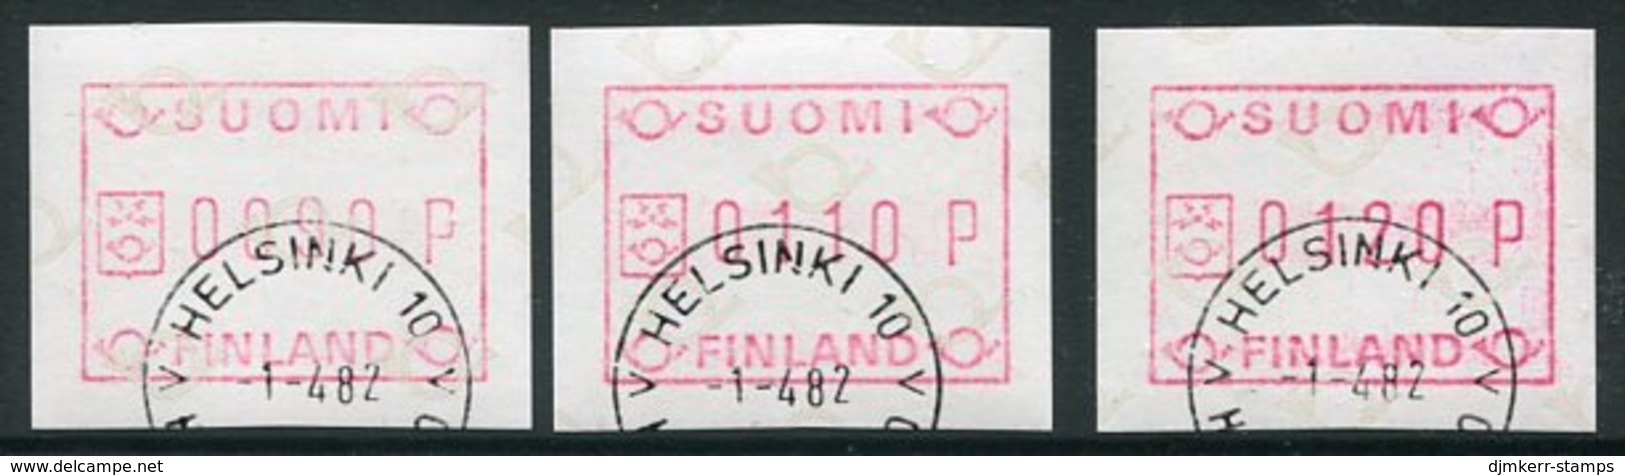 FINLAND 1982 Definitive  ATM, Three Values Used..  Michel 1 - Automaatzegels [ATM]